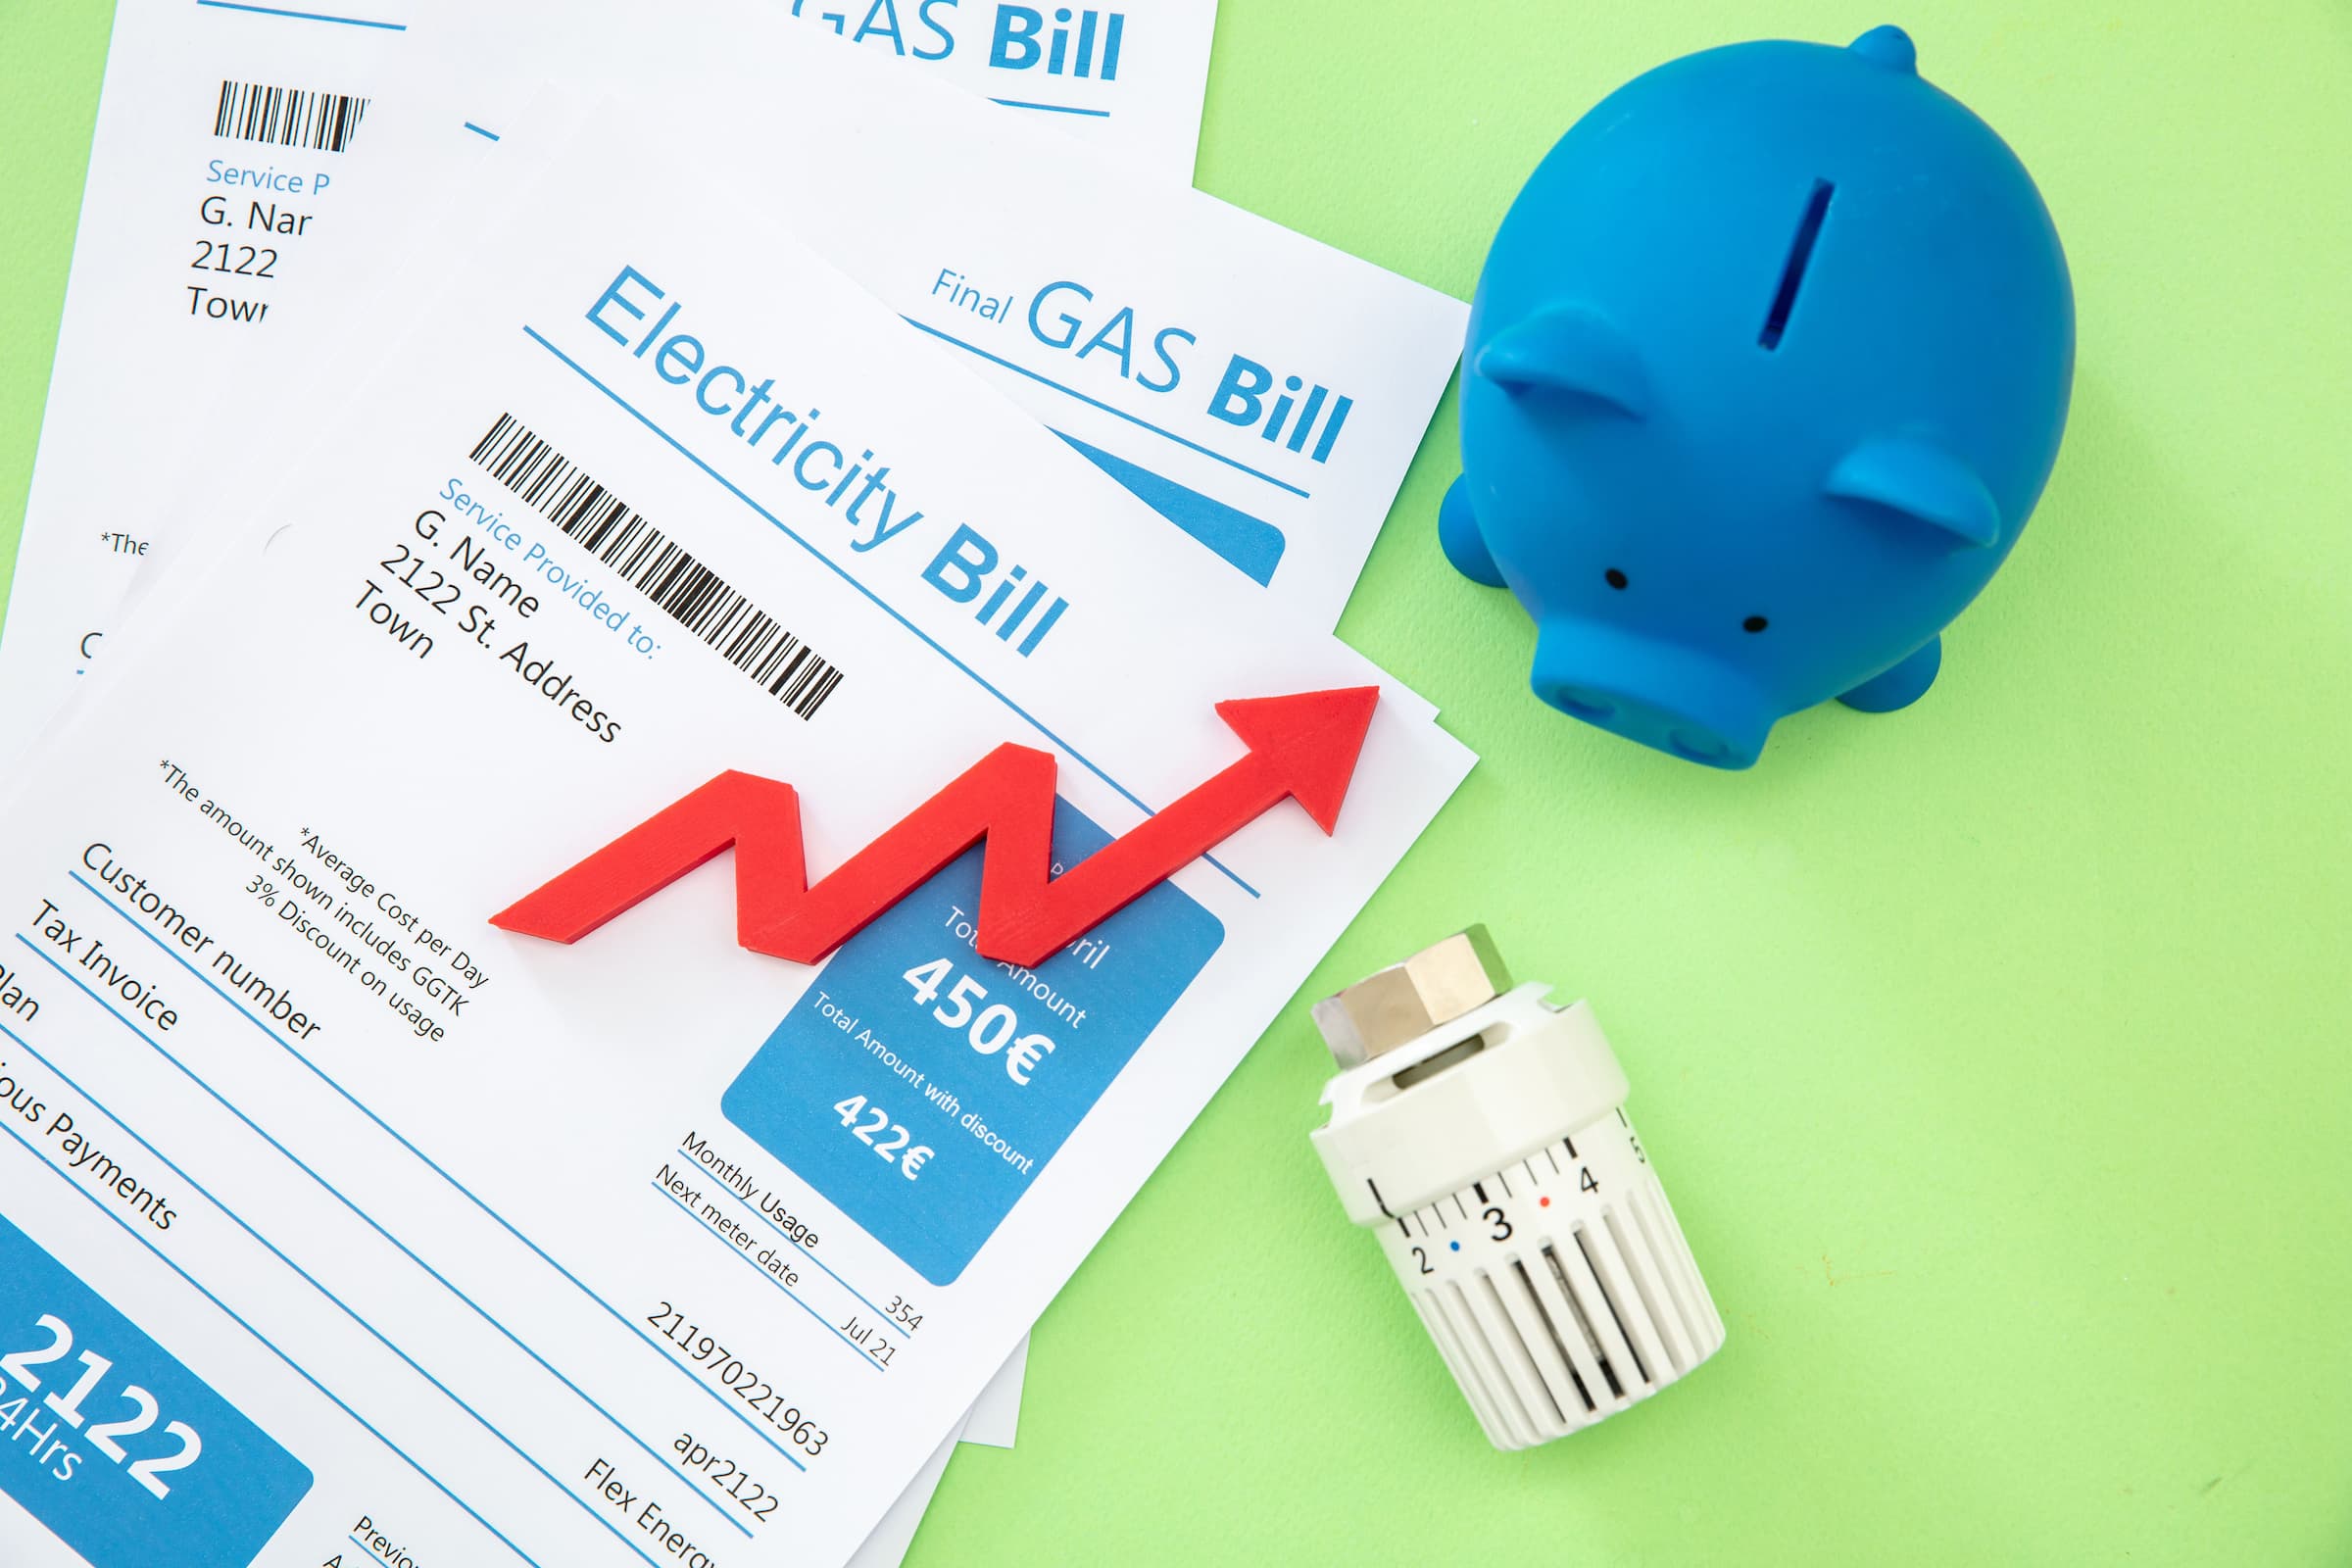 overhead costs as pile of utilities bills next to a piggy bank